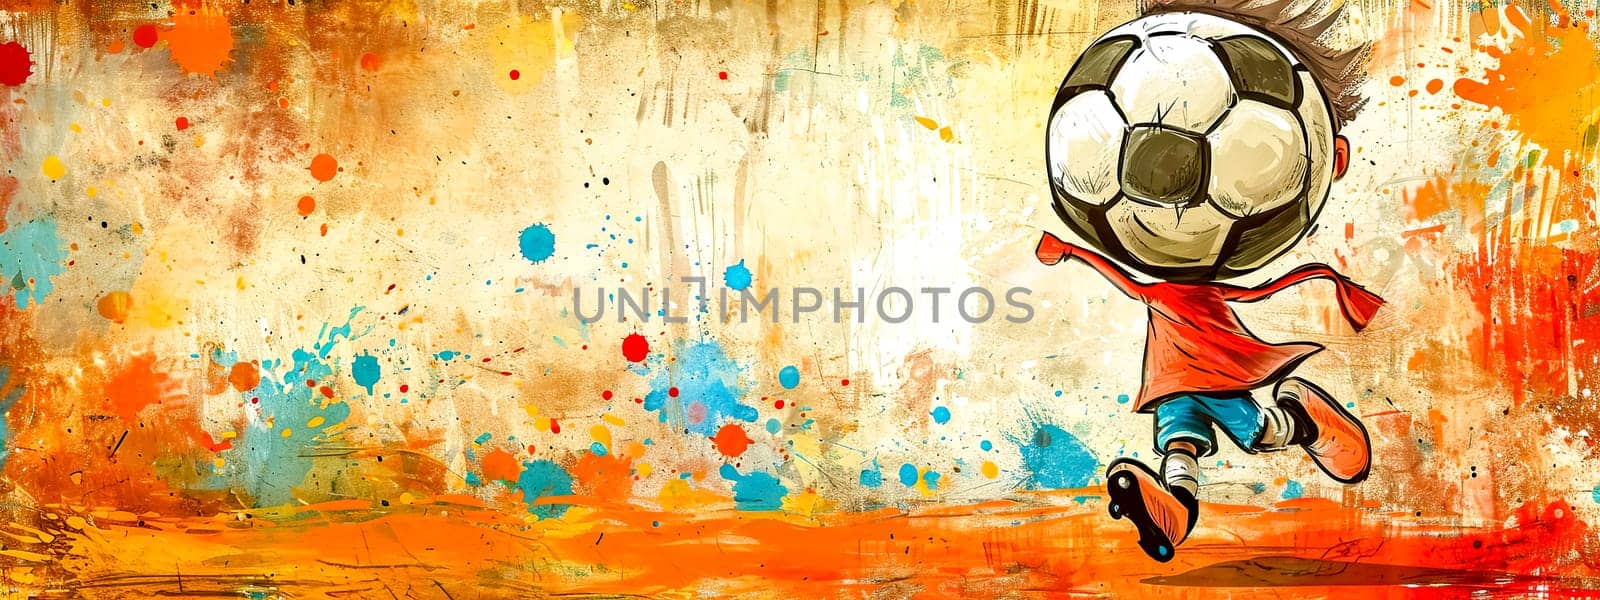 soccer ball character wearing a red cape, mid-action against a vibrant abstract background splashed with orange, blue, and red, perfect for a dynamic sports event banner with ample text space by Edophoto